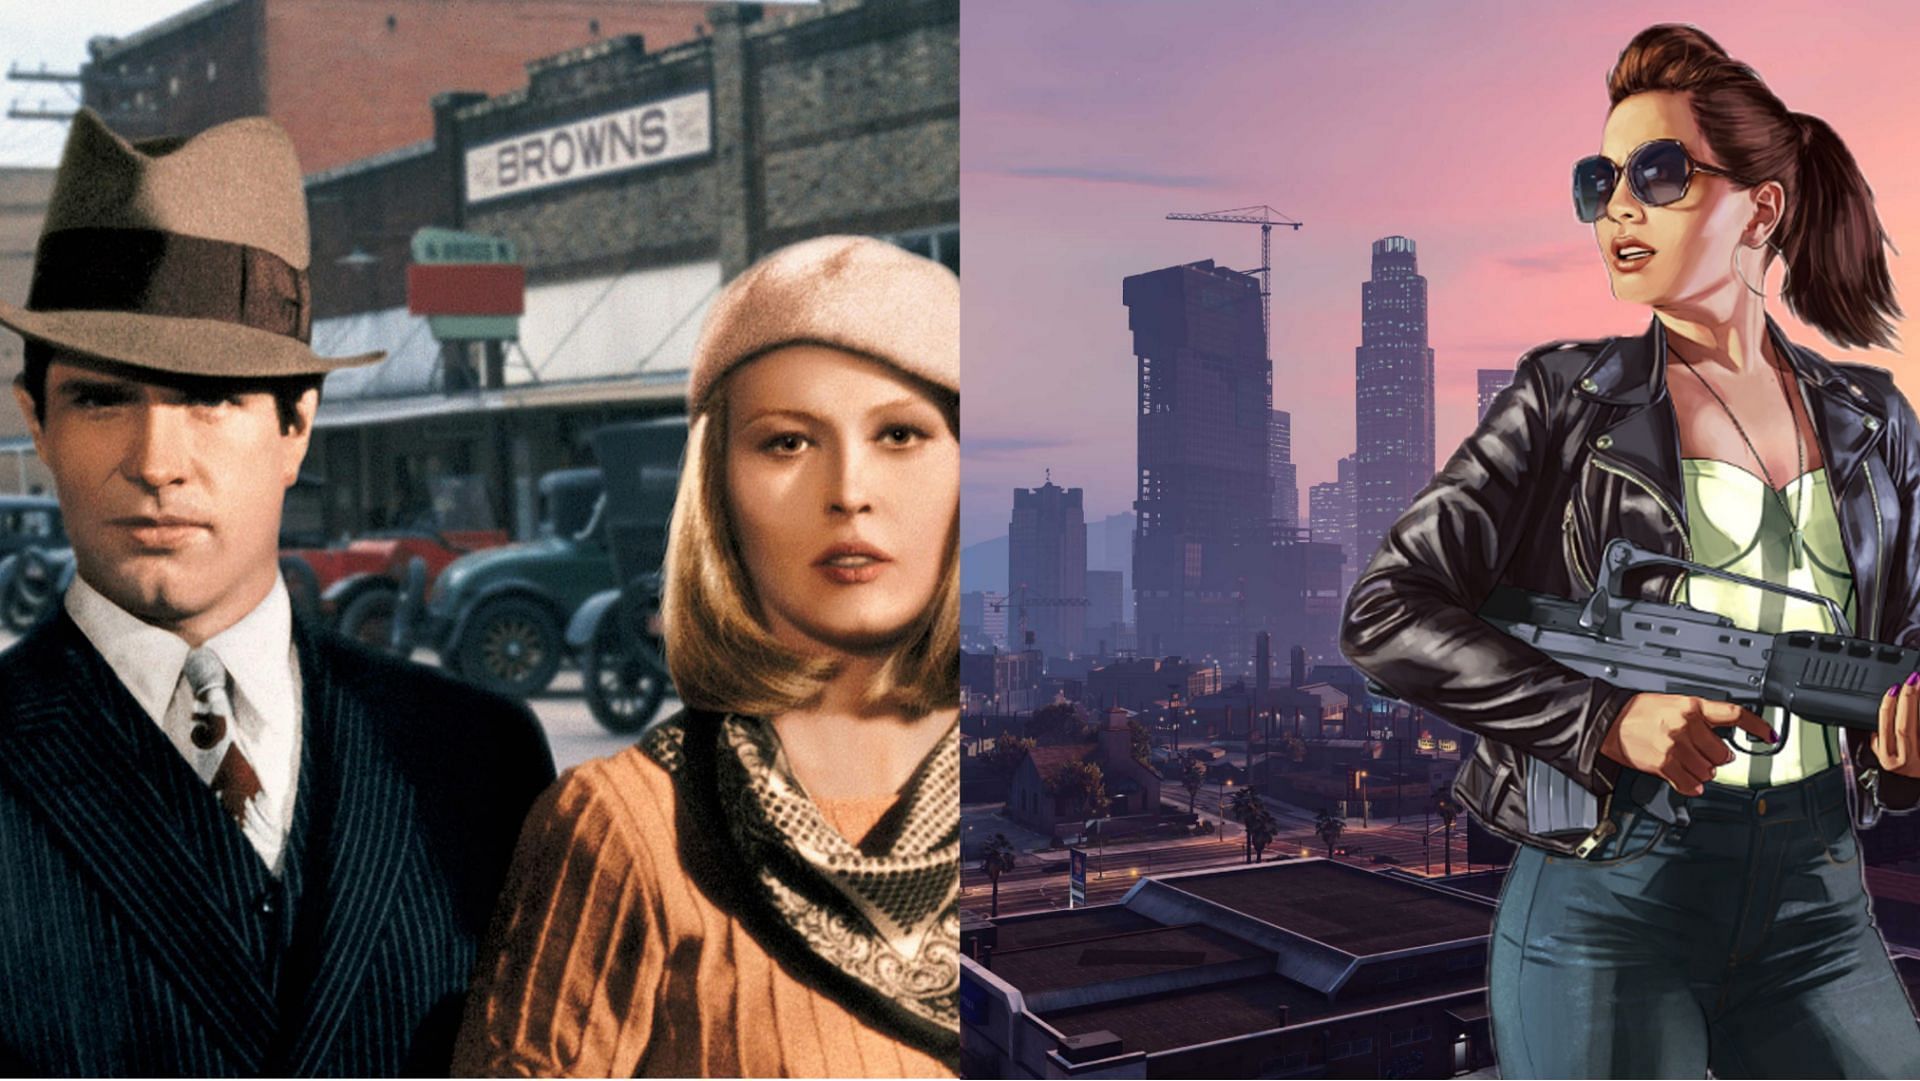 Why Bonnie & Clyde might be good models for GTA 6